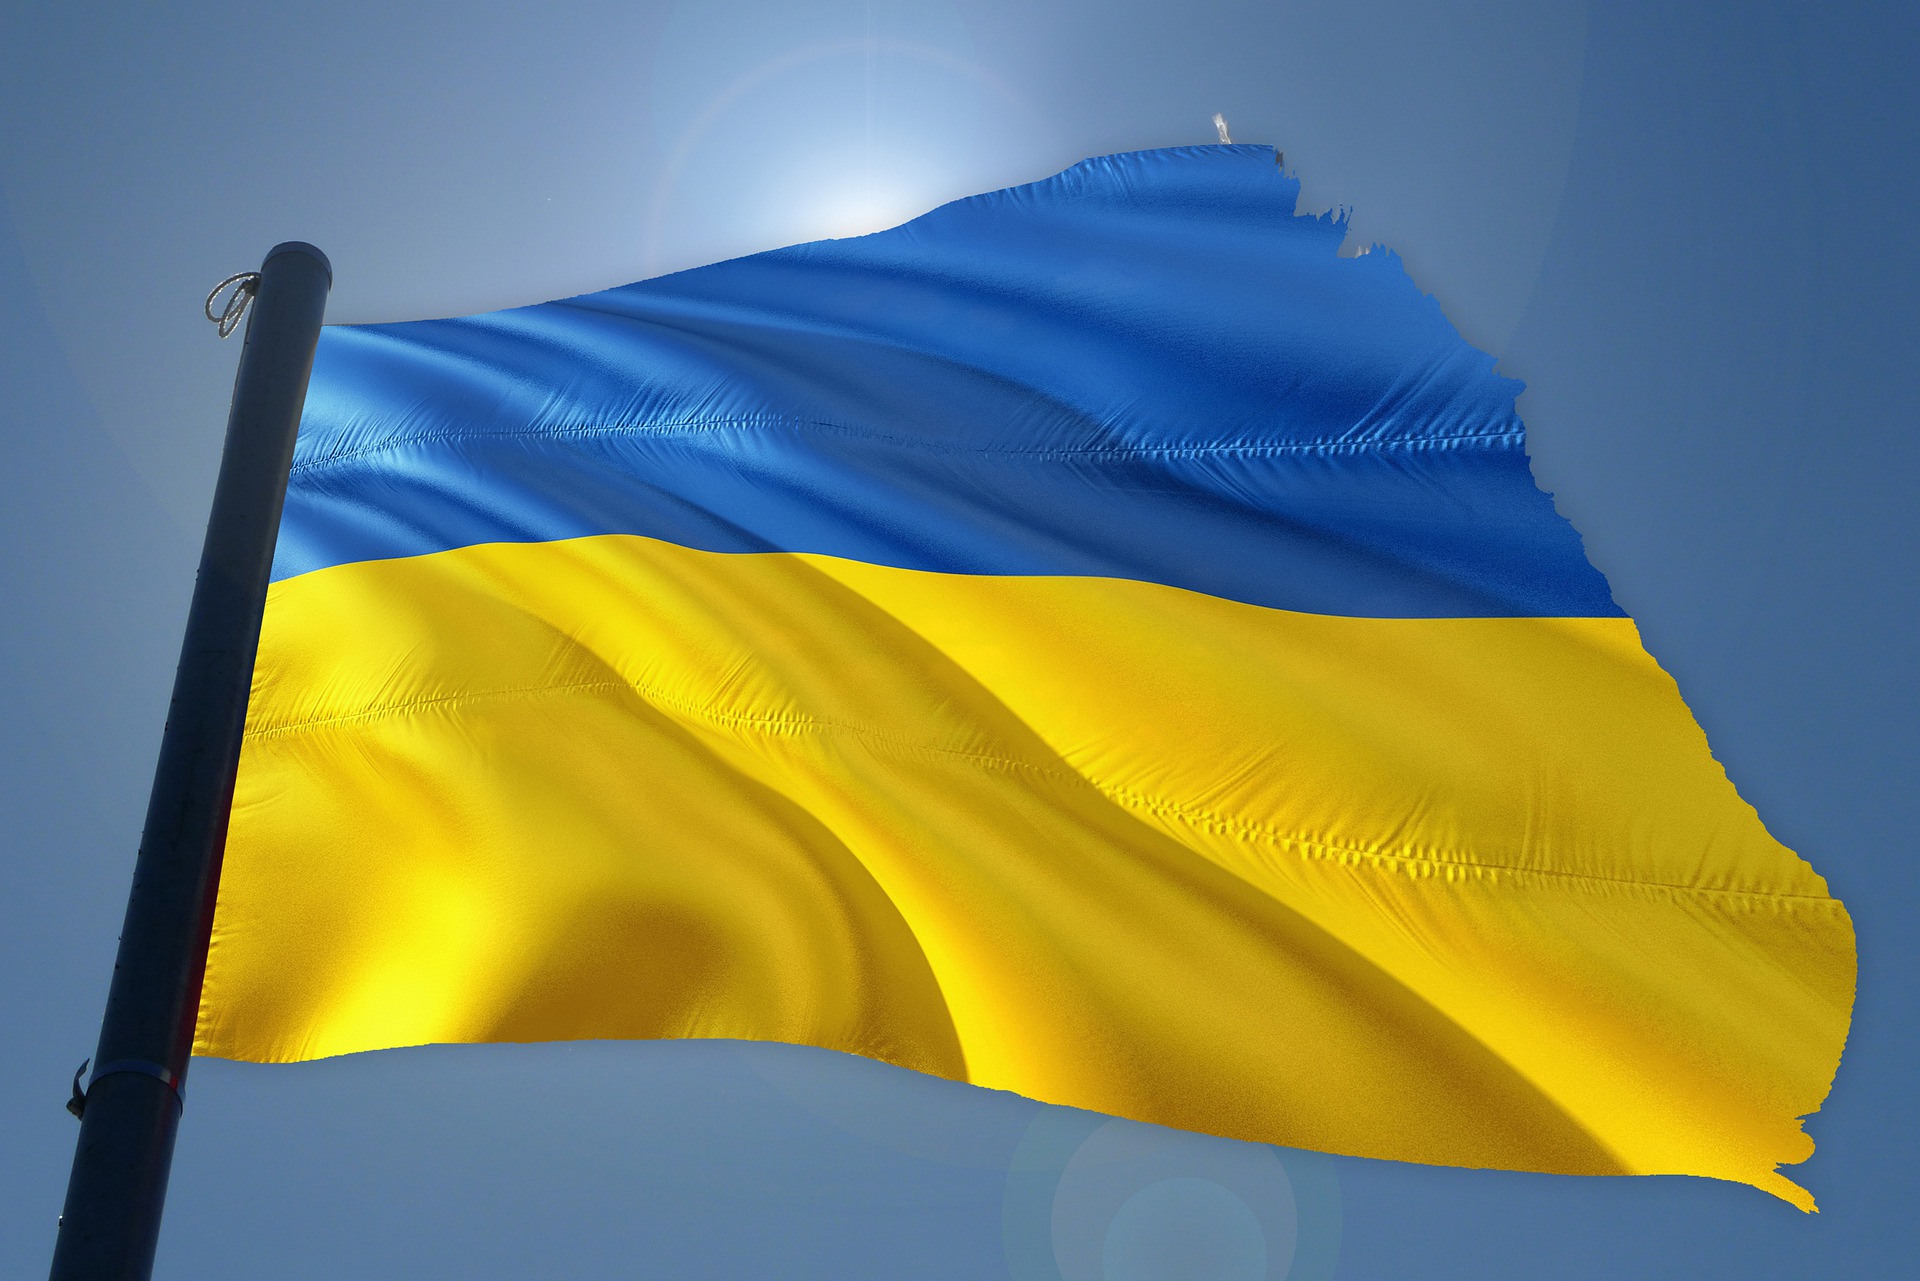 Ukraine initiative partners with financial institutions to create a borderless ecosystem